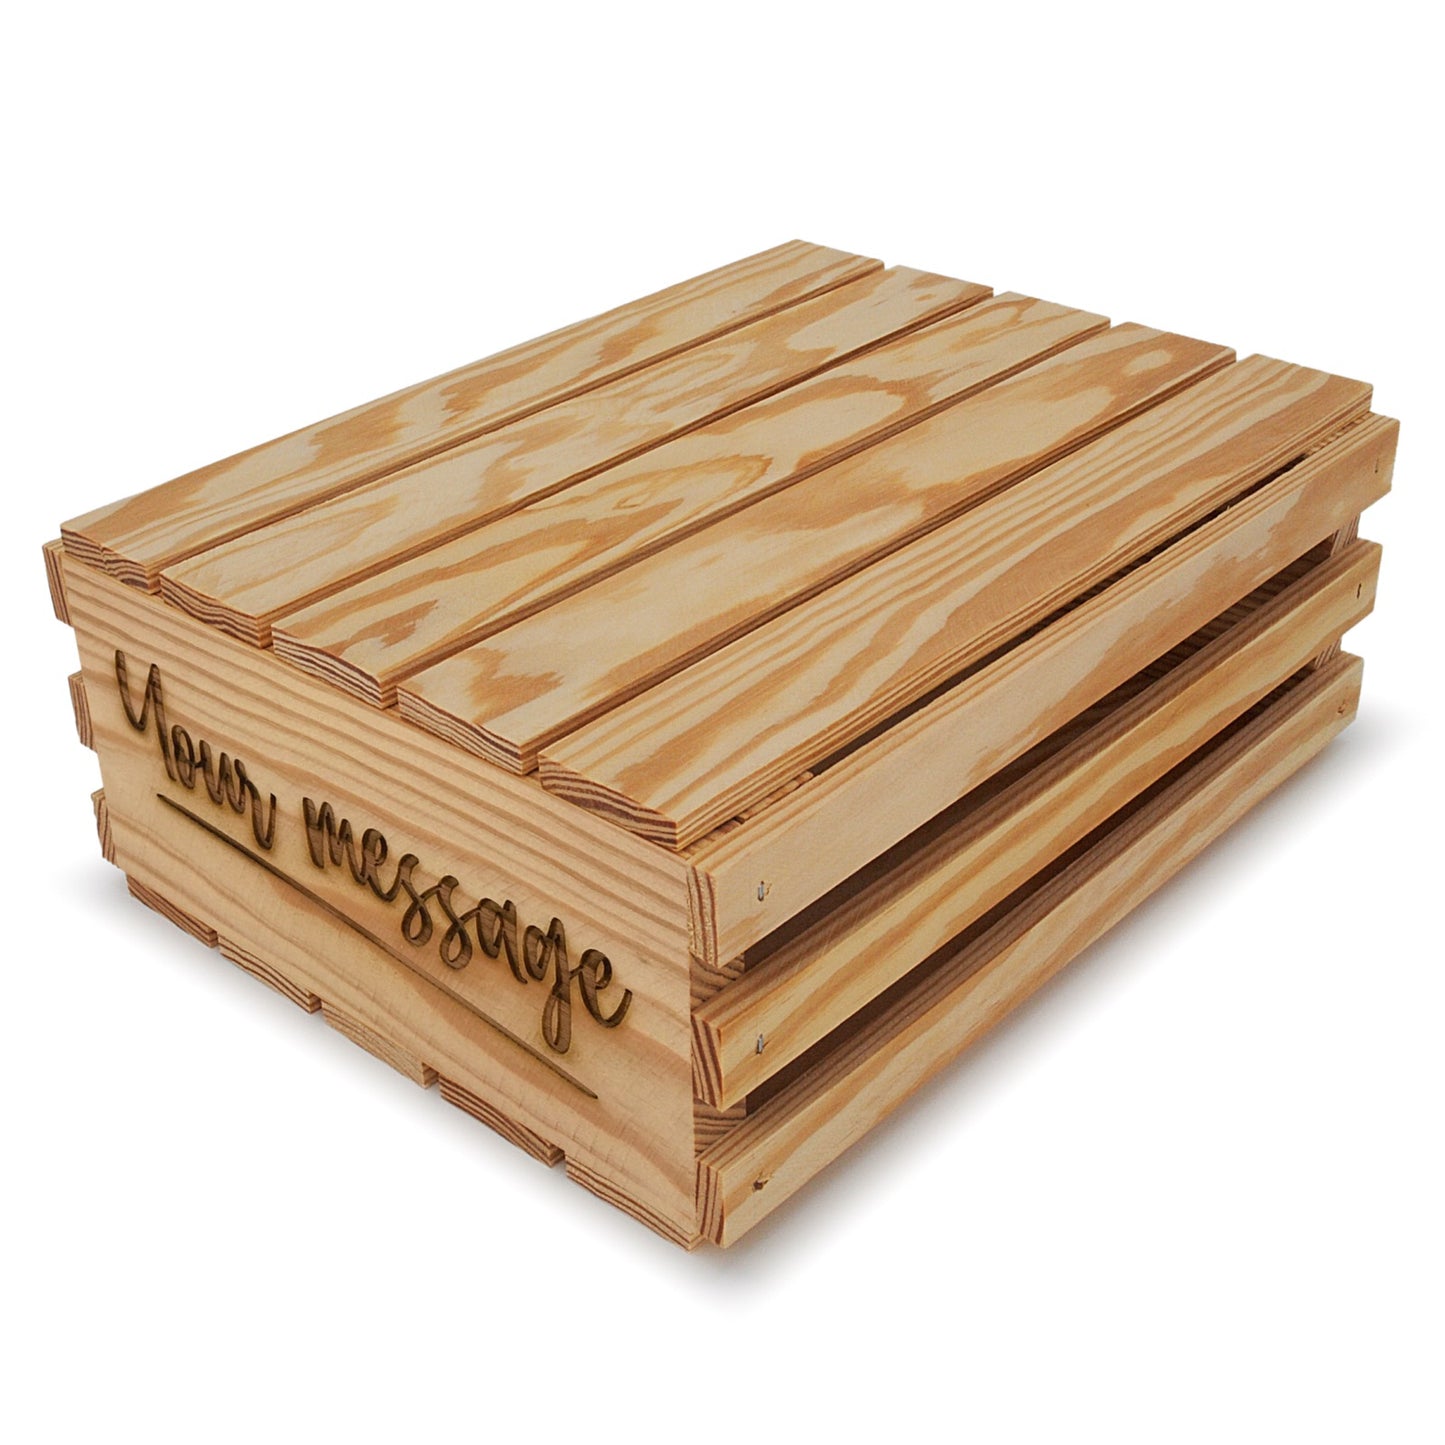 Small wooden crates with lid and your custom message 12x10x4.5, 6-SS-12-10-4.5-ST-NW-LL, 12-SS-12-10-4.5-ST-NW-LL, 24-SS-12-10-4.5-ST-NW-LL, 48-SS-12-10-4.5-ST-NW-LL, 96-SS-12-10-4.5-ST-NW-LL